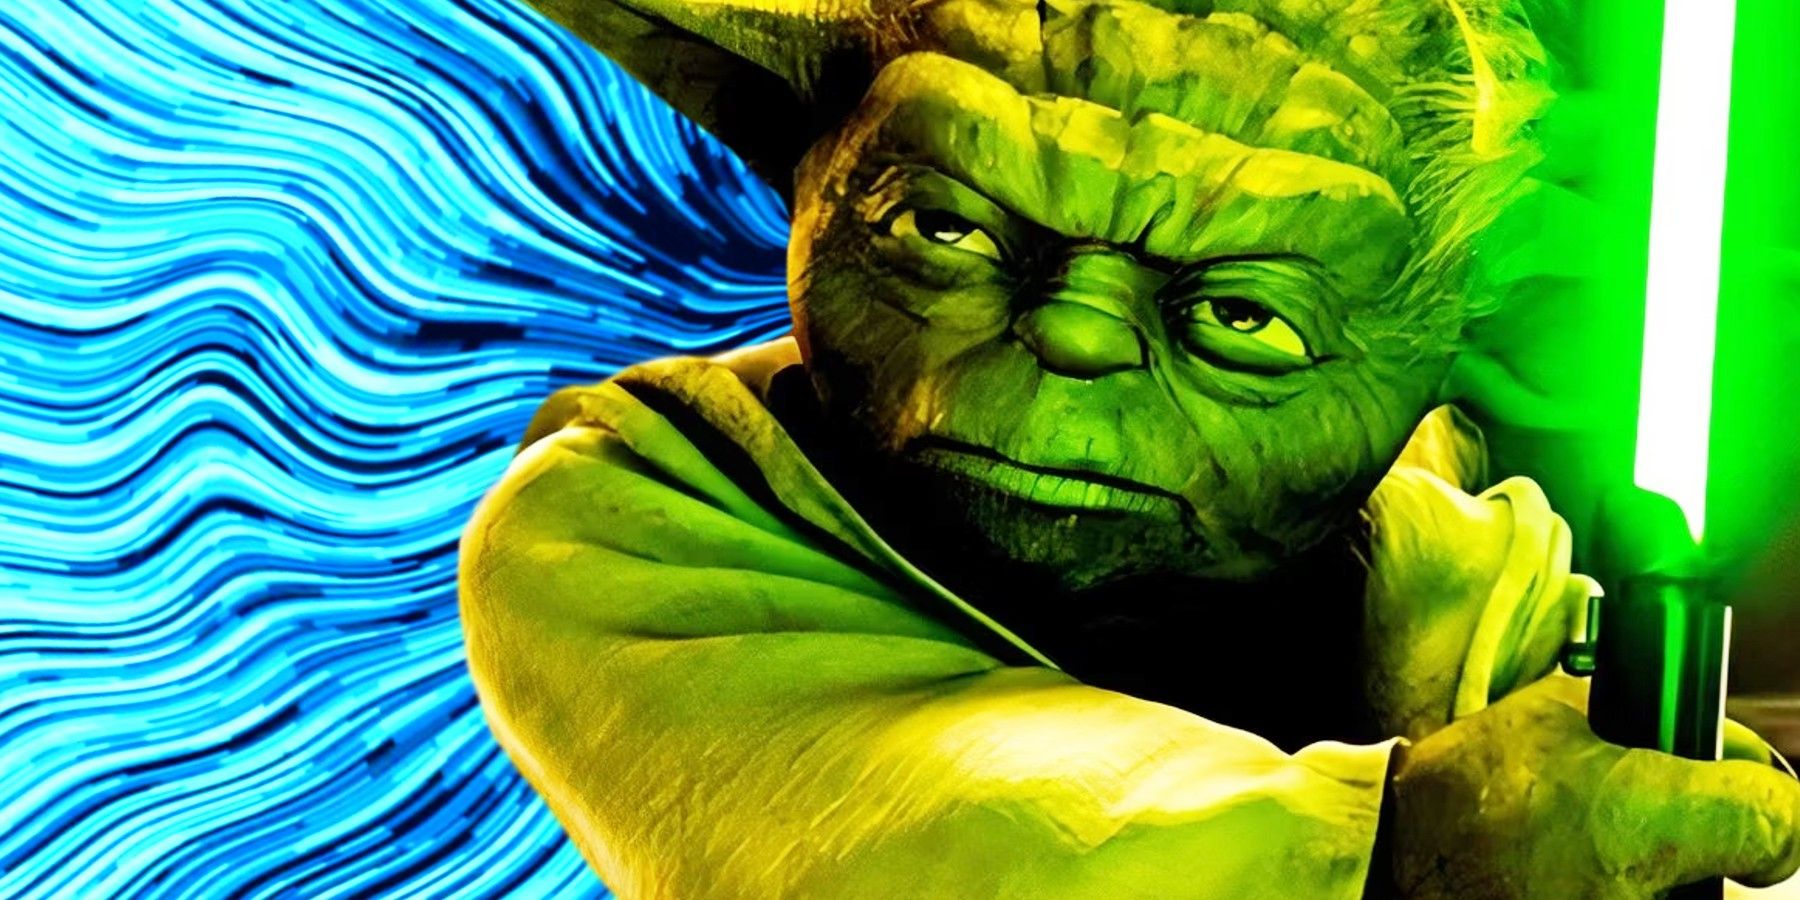 STAR WARS' YODA WITH A WEIRD TWISTY REPRESENTATION OF THE FORCE